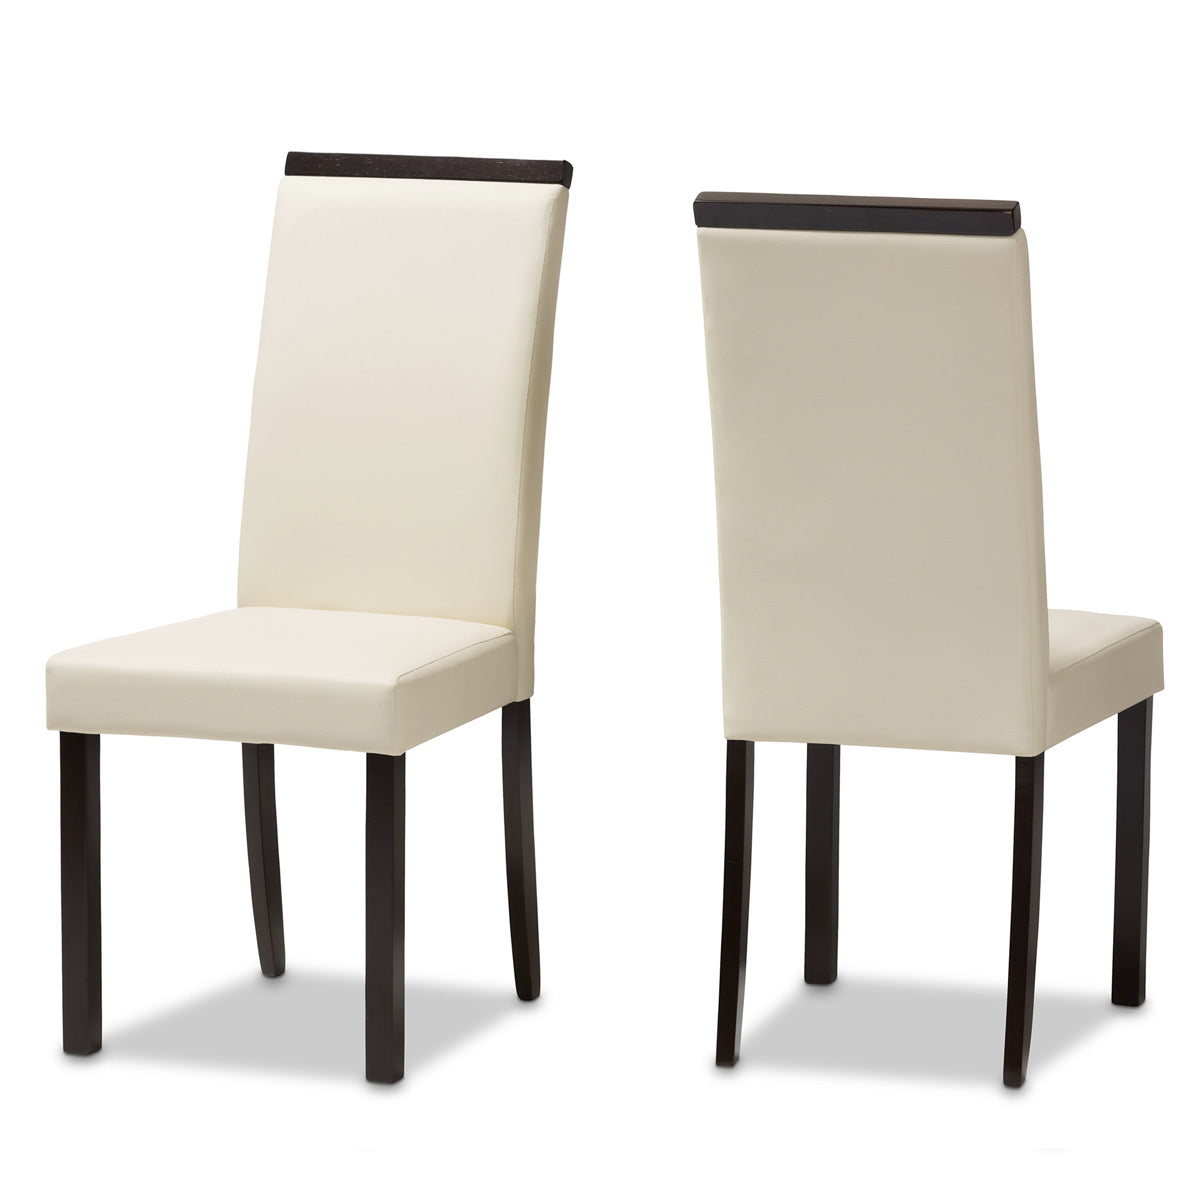 Baxton Studio Daveney Modern and Contemporary Cream Faux Leather Upholstered Dining Chair (Set of 2) Baxton Studio-dining chair-Minimal And Modern - 1